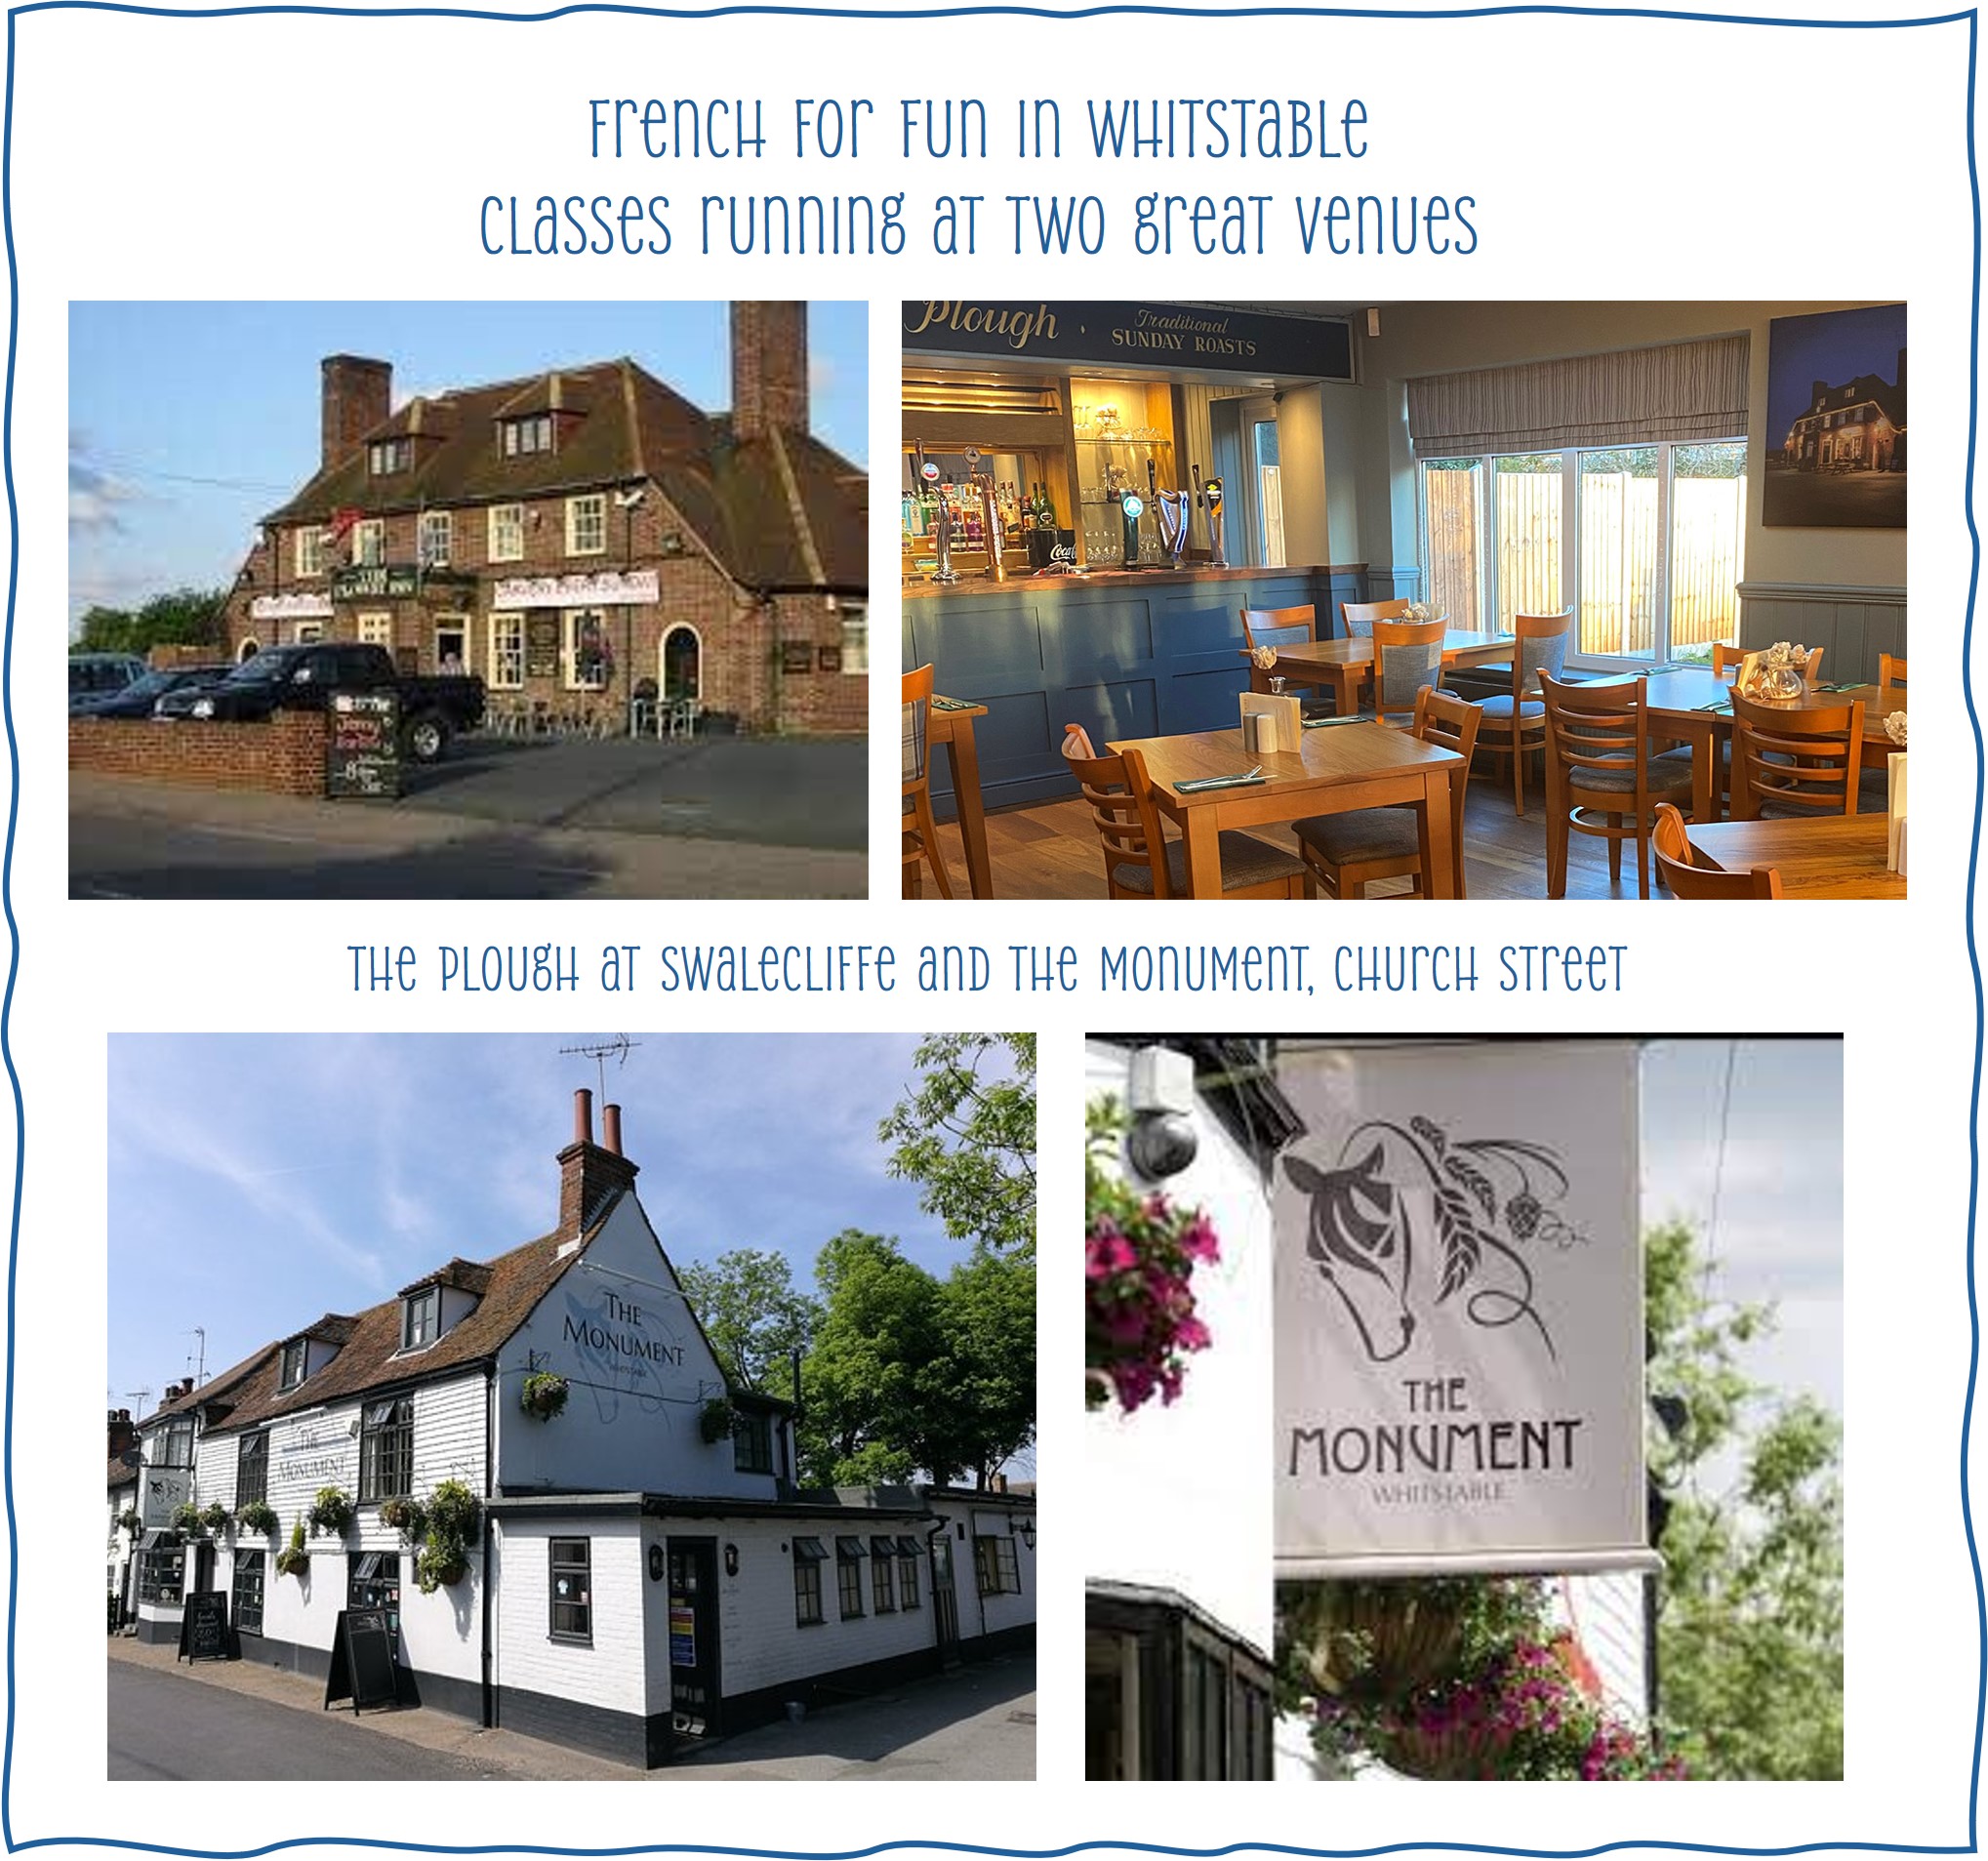 NEW venue Whitstable